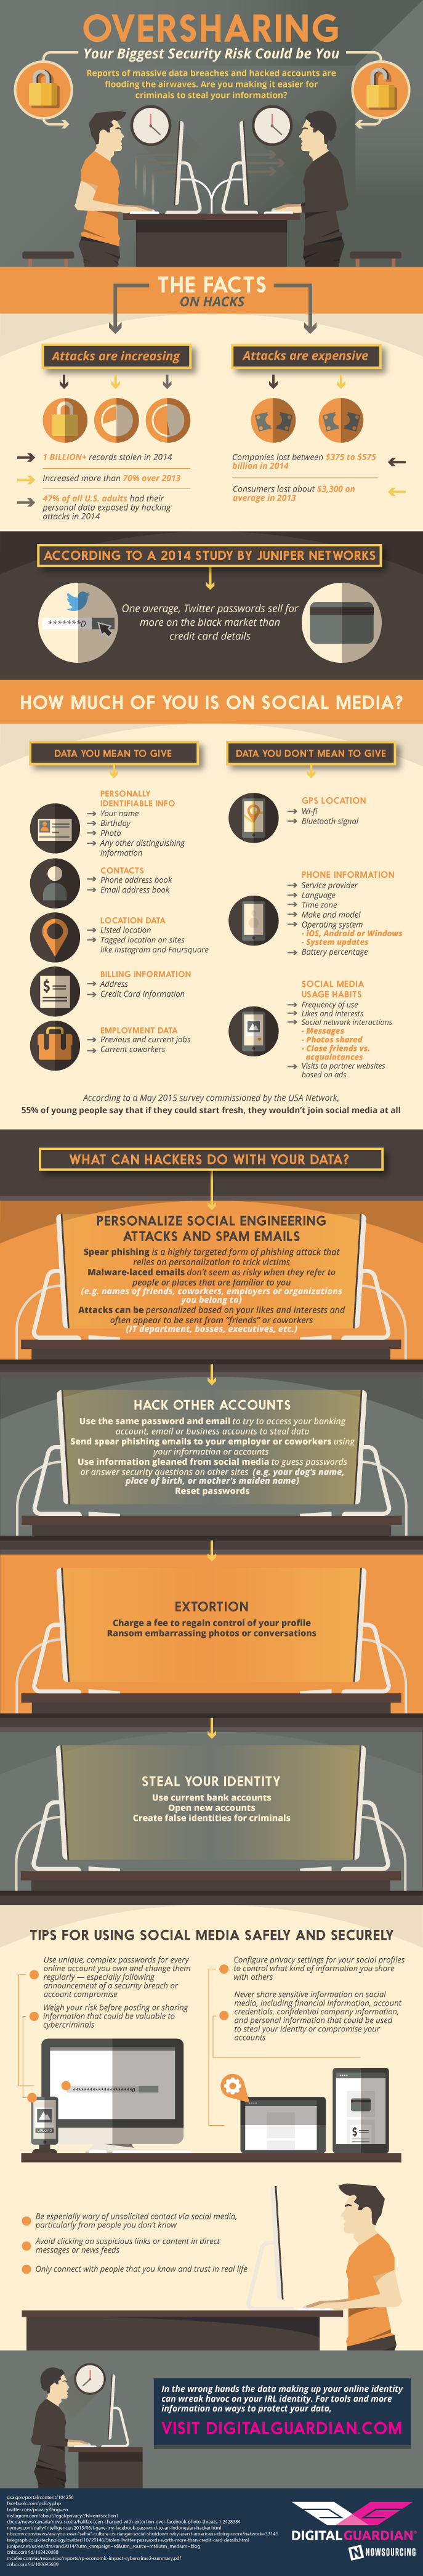 social-media-oversharing-security-risks-infographic